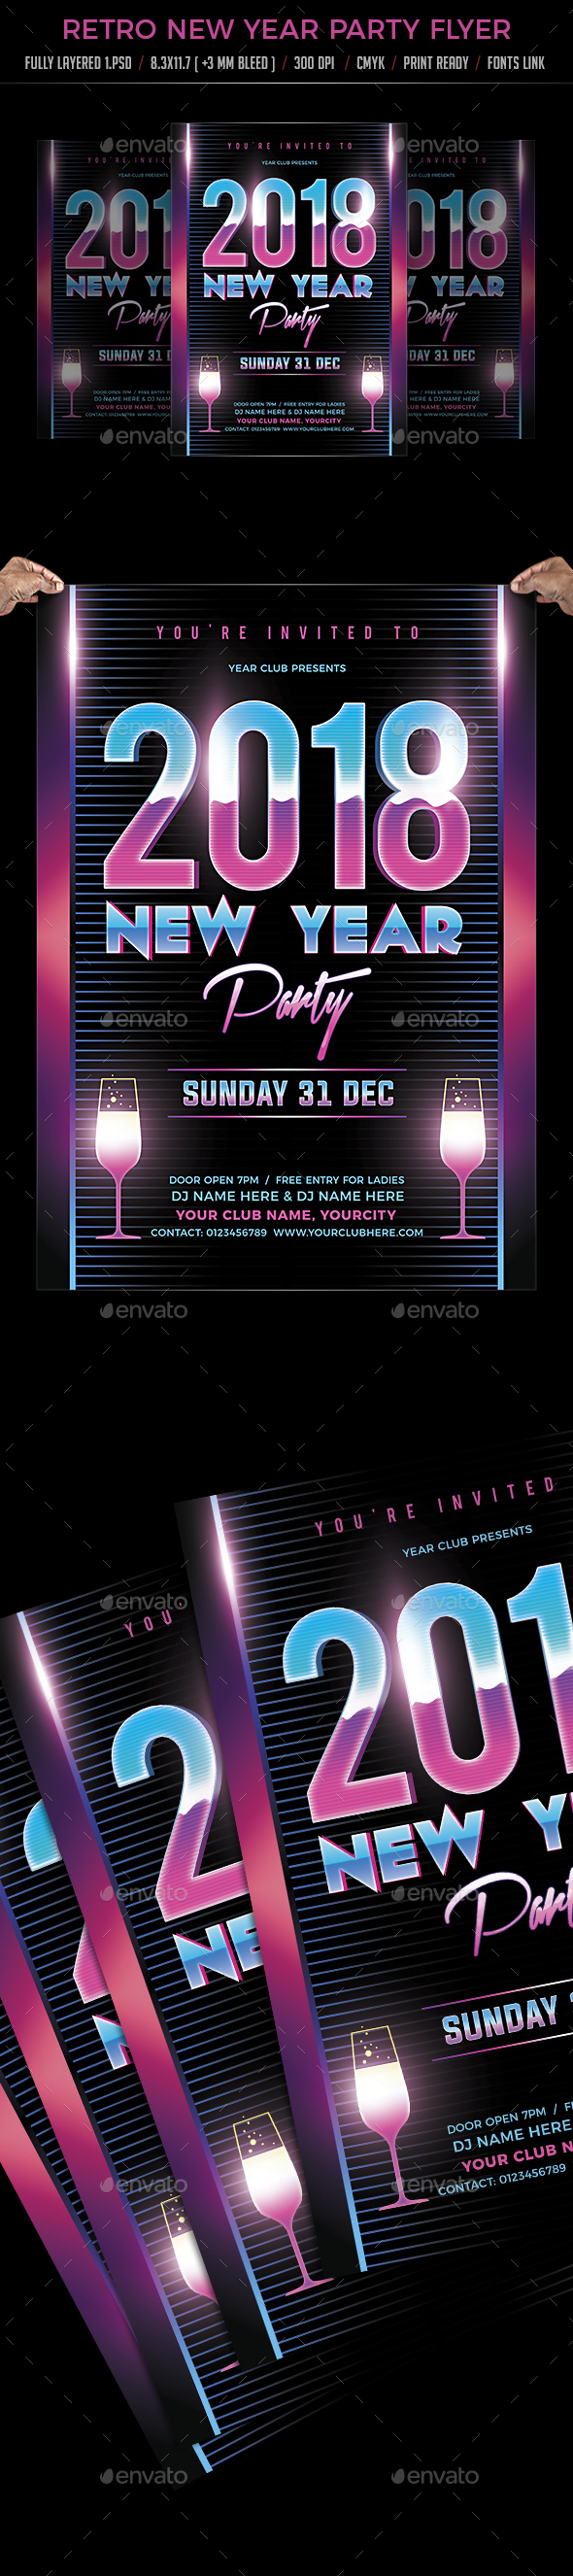 Retro New Year Party Flyer